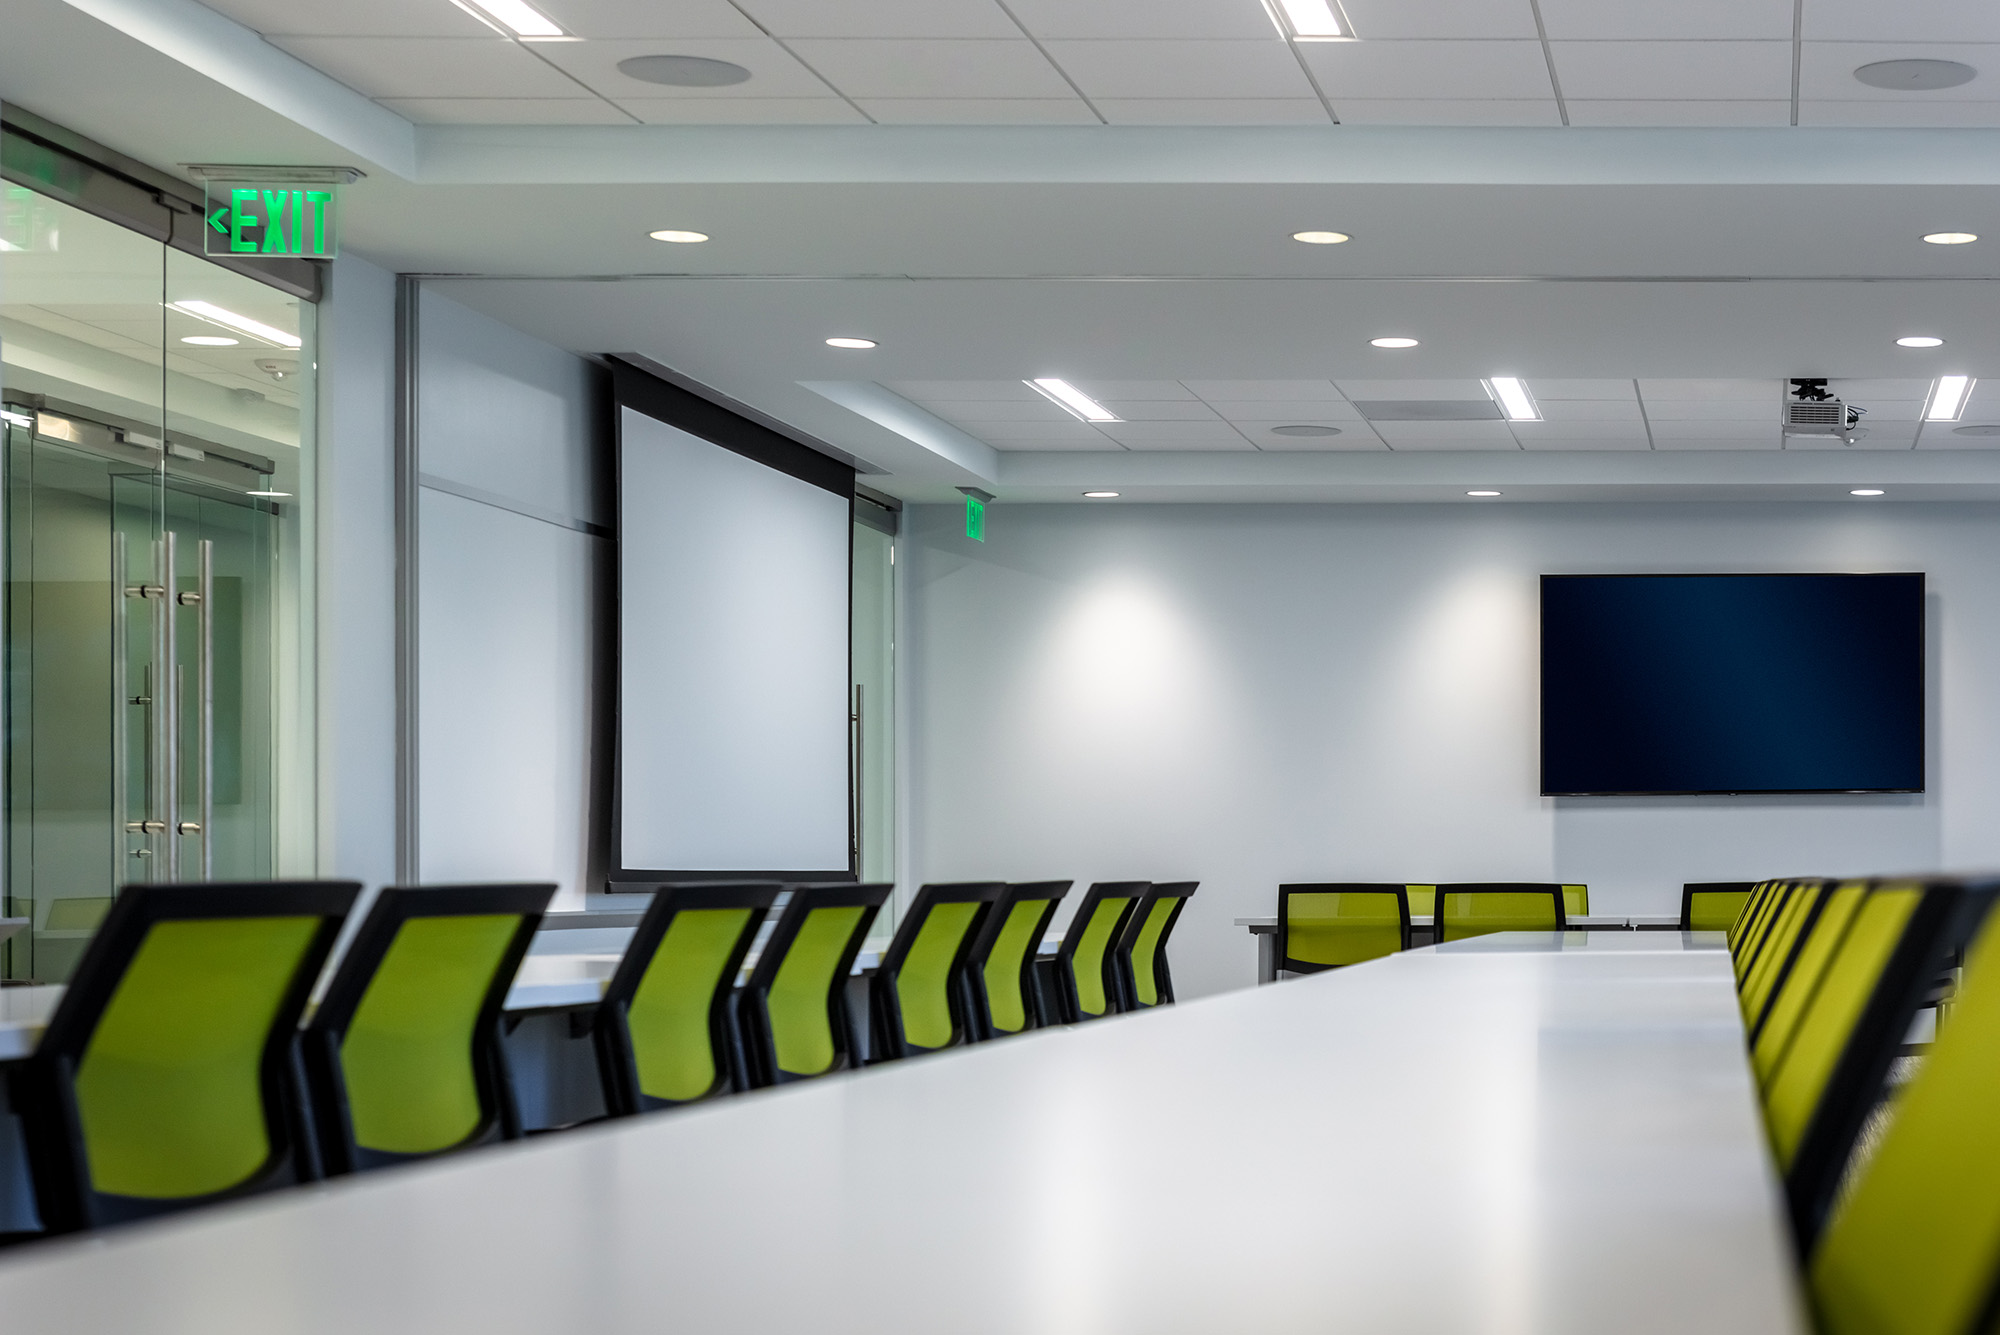 Large, modern conference room with a large TV and projector